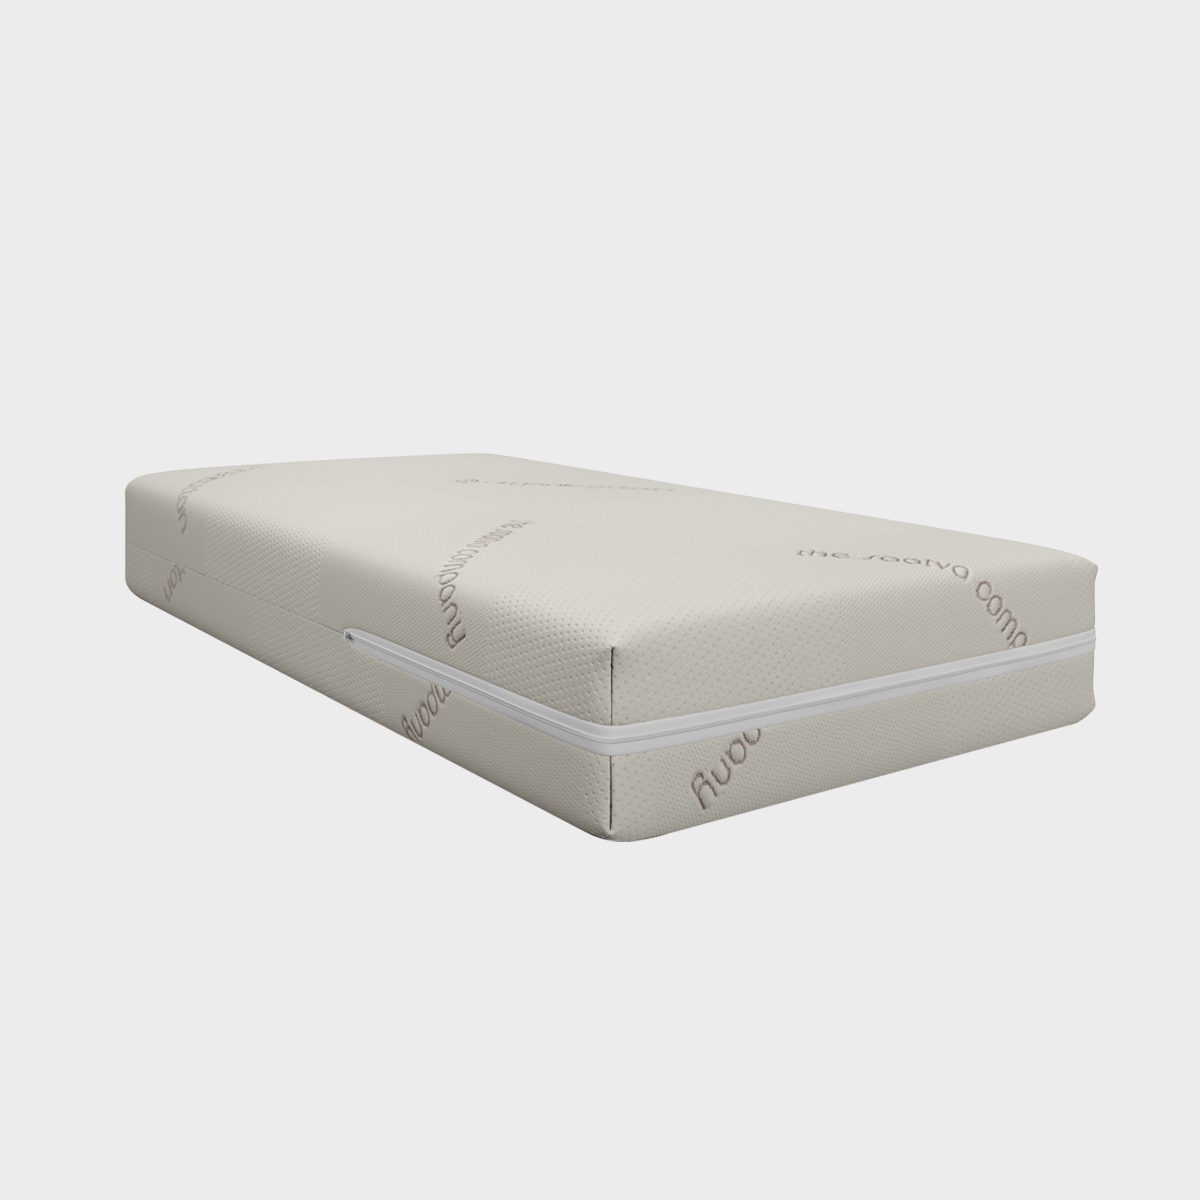 <p>If you really want to impress a loved one with one of the best baby gifts you could buy, this <a href="https://www.saatva.com/mattresses/crib-mattress" rel="noopener noreferrer">Saatva crib mattress</a> is the way to go. It's a dual-sized, organic and non-toxic piece they'll use every night for years, it easily fits in most toddler beds and it offers the same high-quality sleep experience that makes adult-size Saatva beds some of the <a href="https://www.rd.com/list/best-hybrid-mattress/" rel="noopener noreferrer">best hybrid mattresses</a> on the market.</p> <p class="listicle-page__cta-button-shop"><a class="shop-btn" href="https://www.saatva.com/mattresses/crib-mattress">Shop Now</a></p>